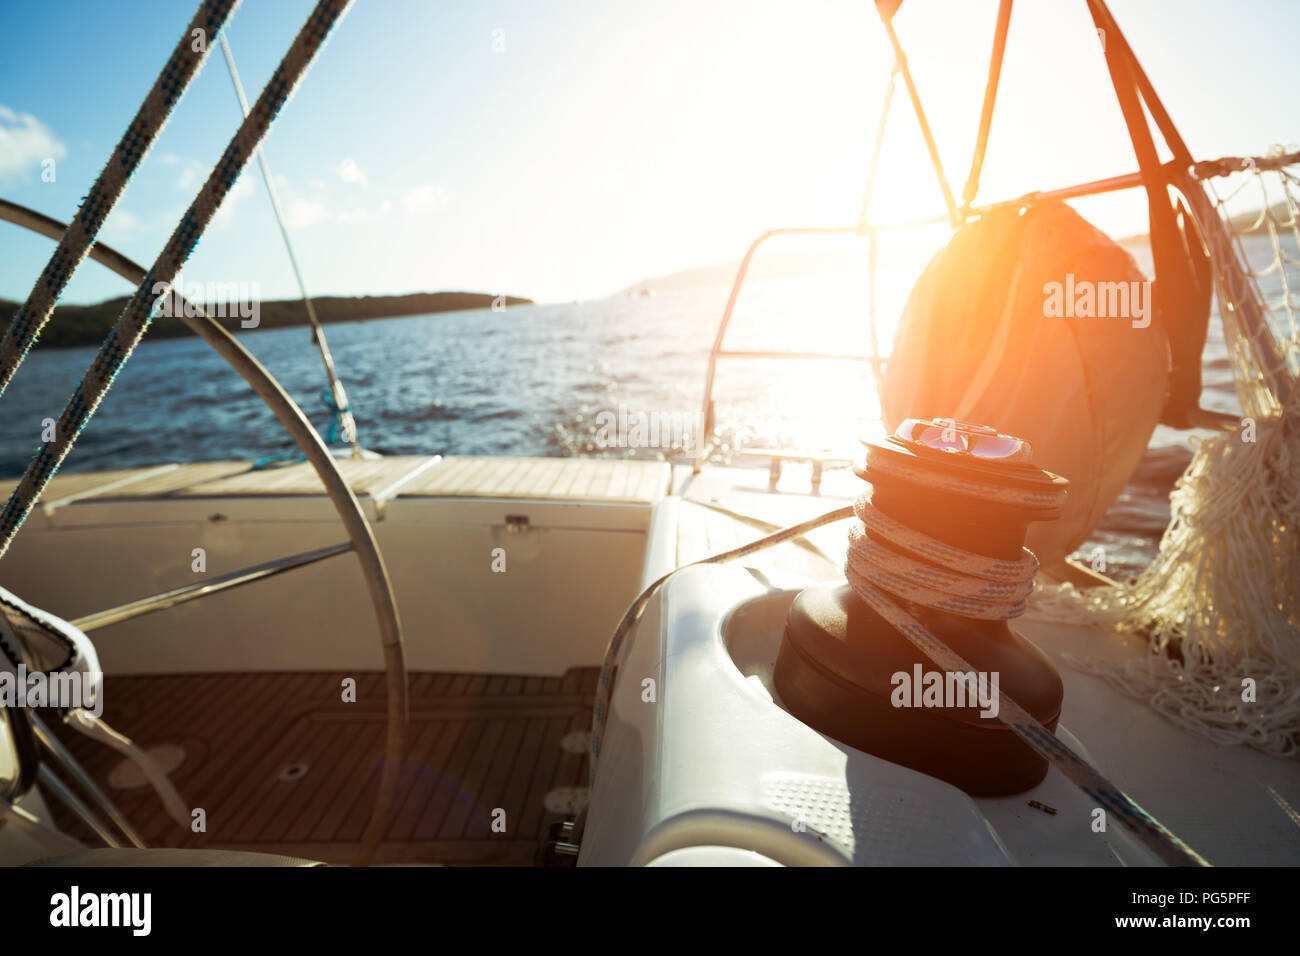 Sailboat with winch and rope on deck Stock Photo